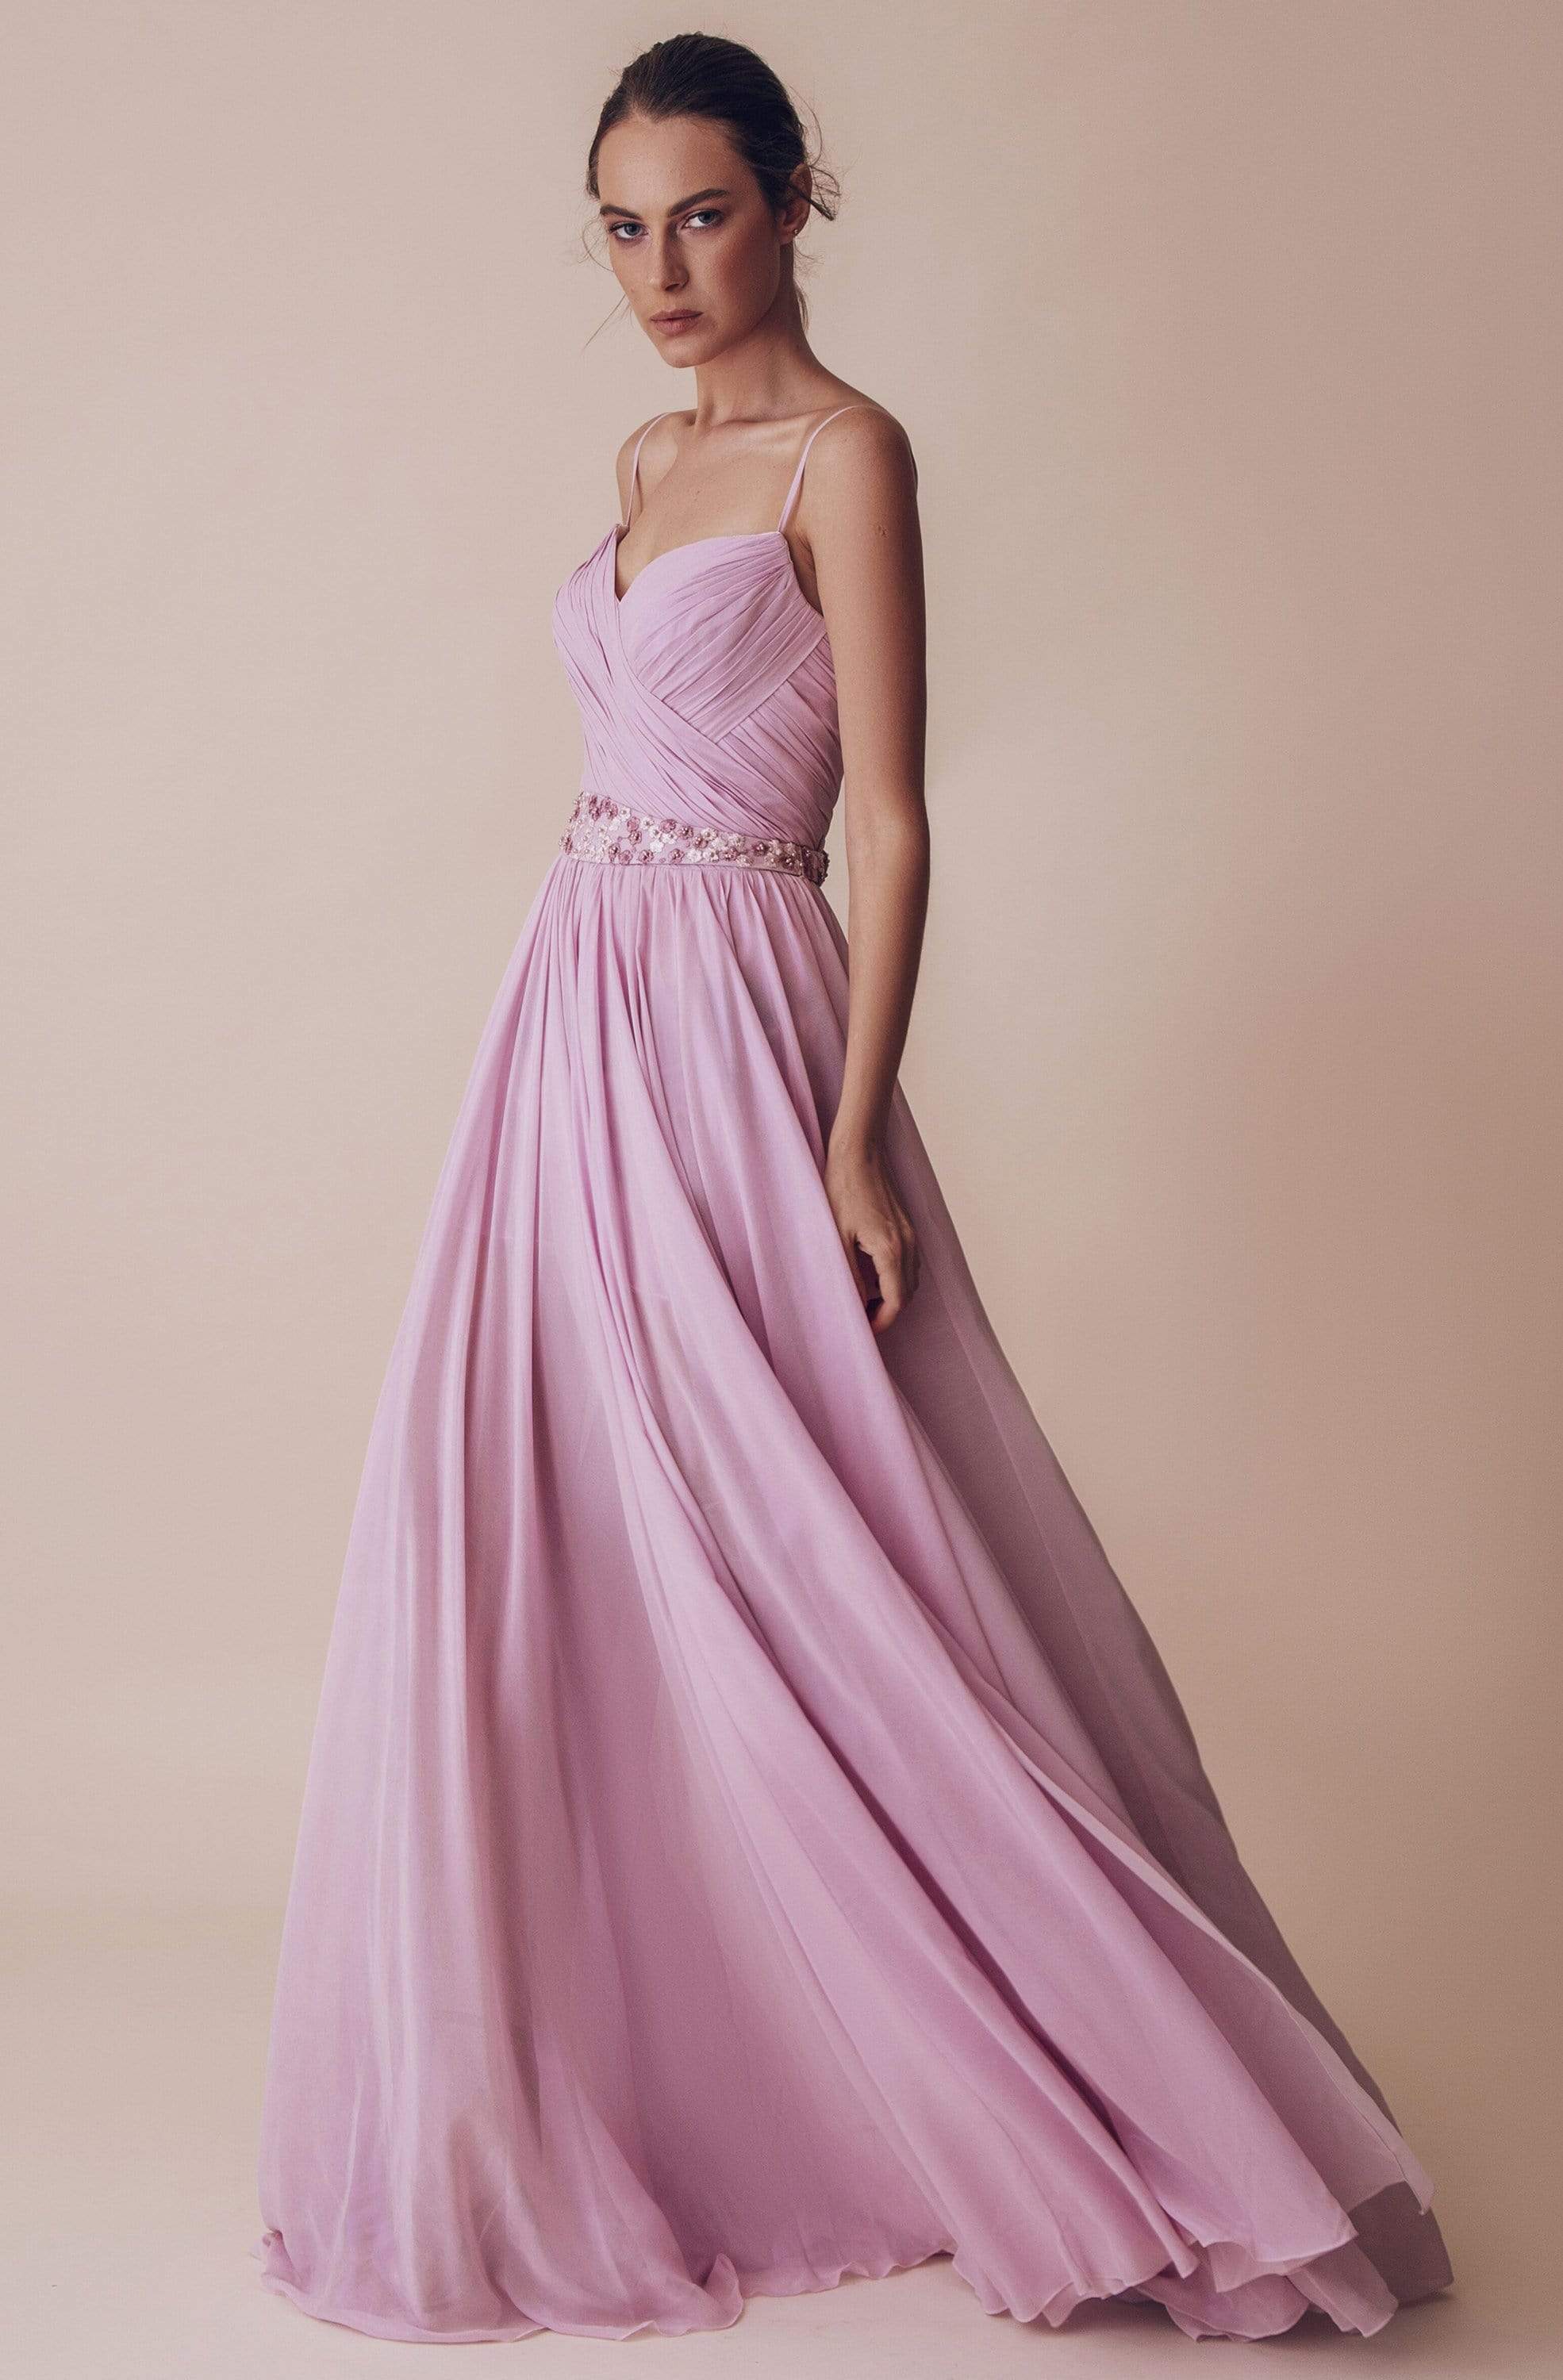 Image of Gatti Nolli Couture - OP-4989 Pleated Sweetheart A-line Dress